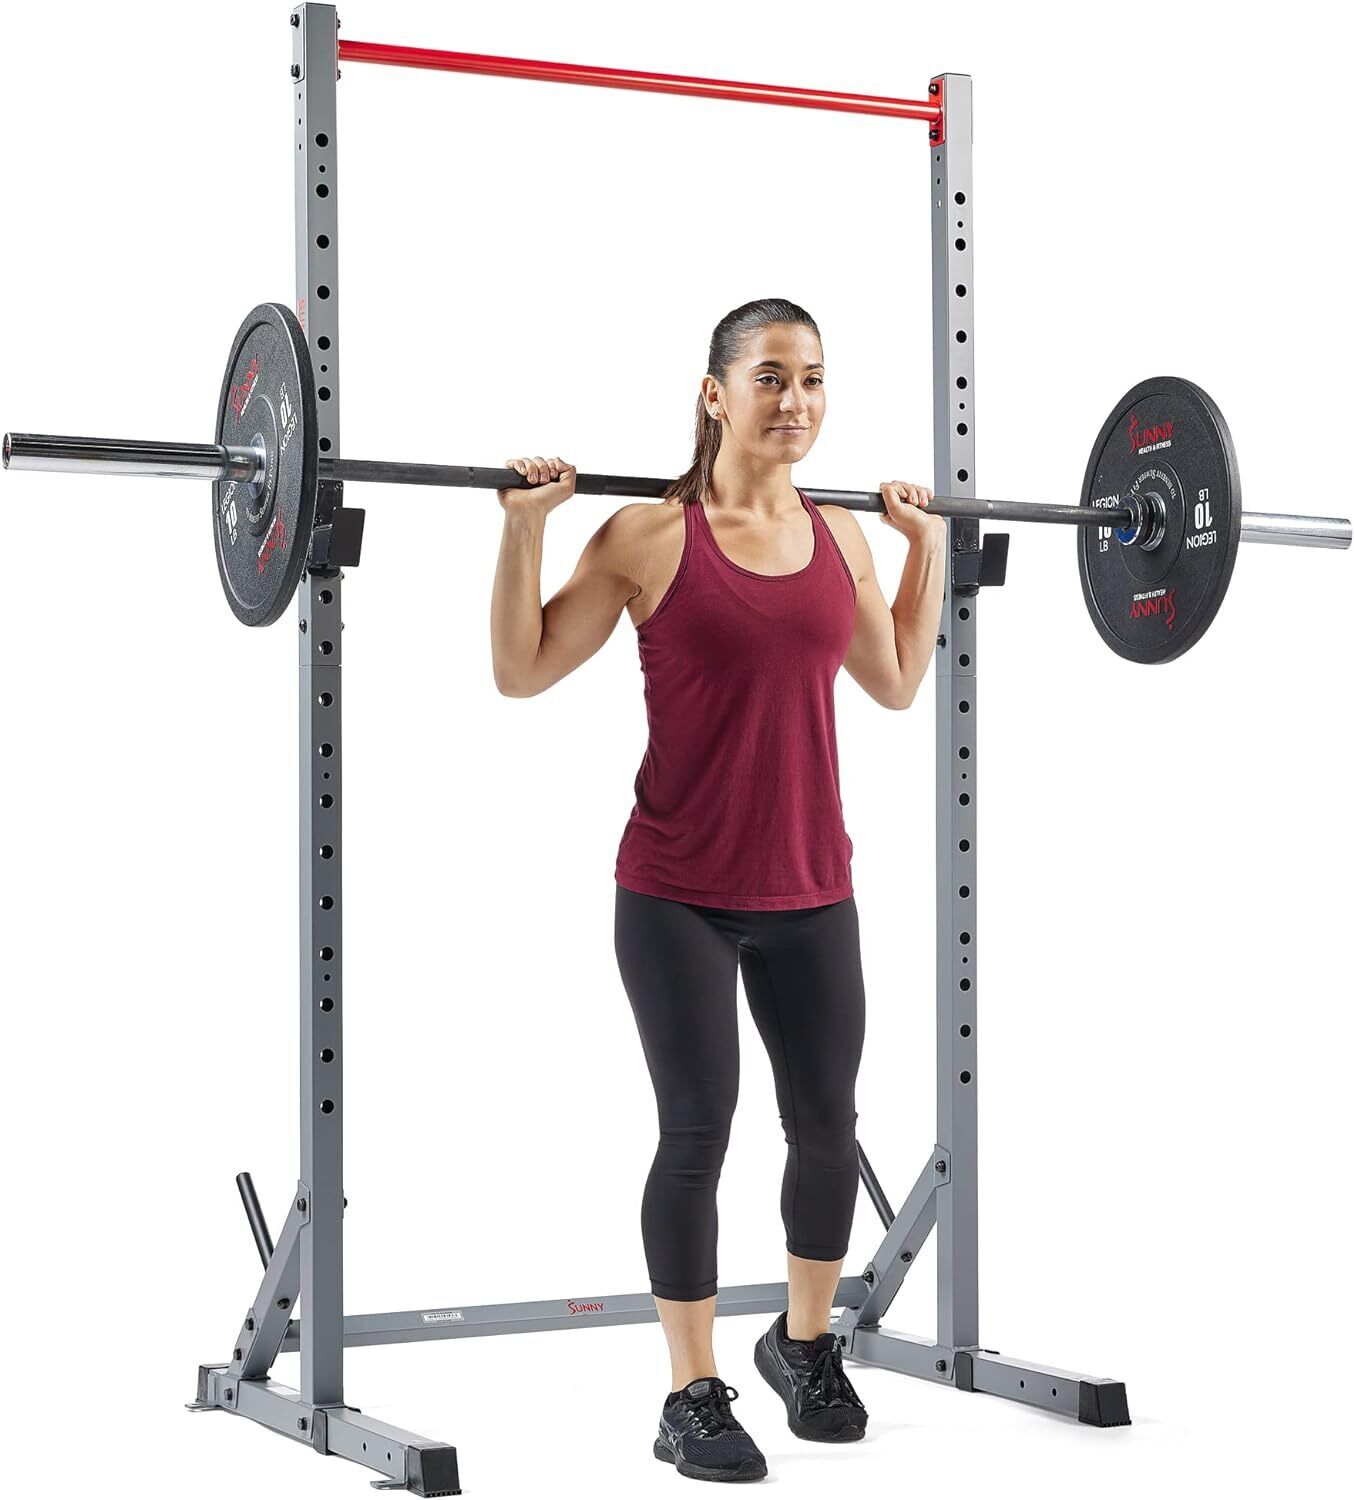 Multifunction Bench Press Squat Rack with Adjustable Pull Up Bar for Home Gym